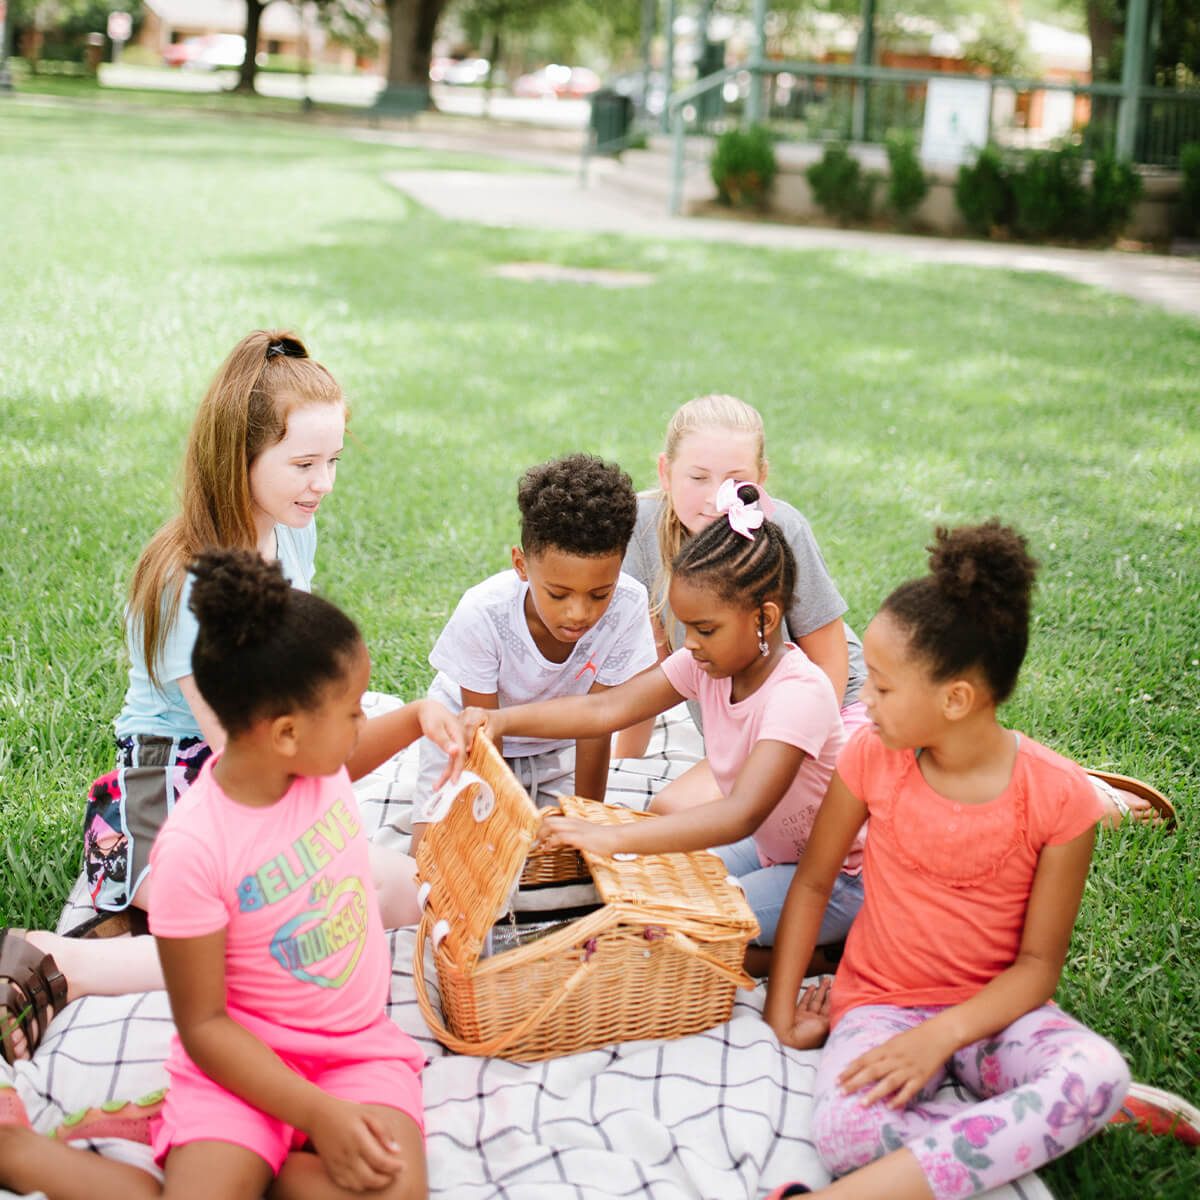 A group of children having a picnic outside at a Hammond, LA park.